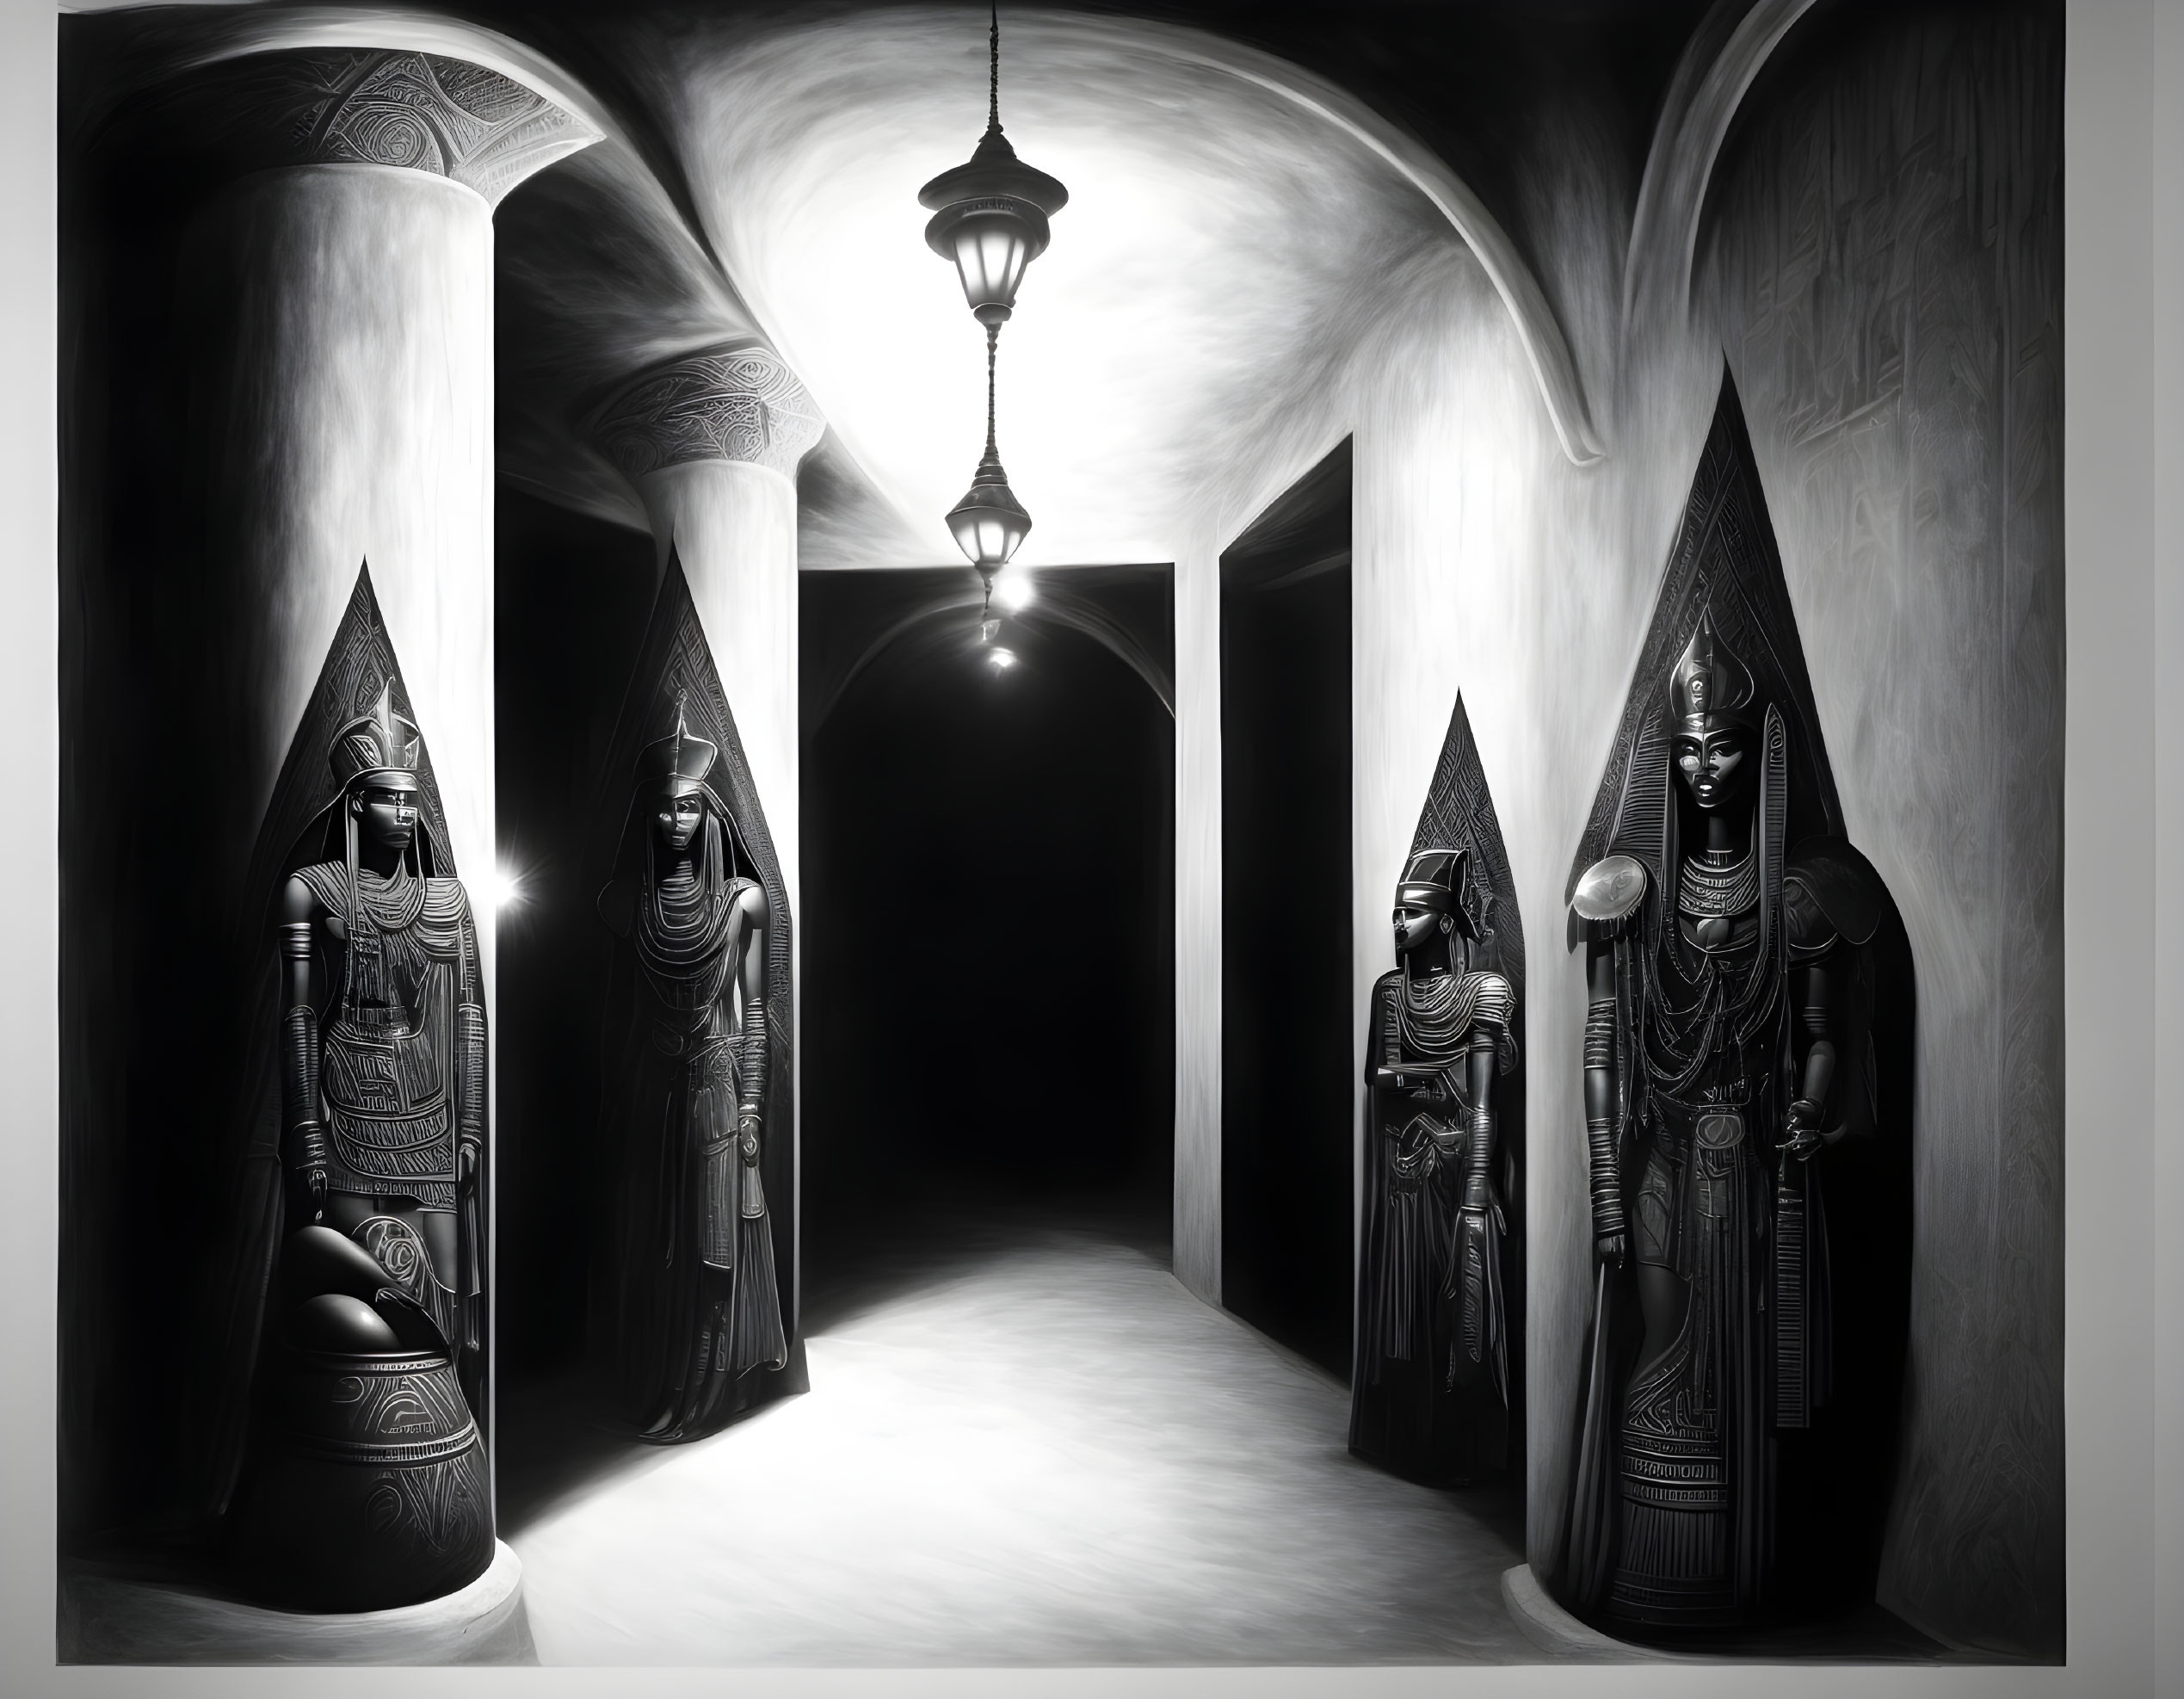 Monochrome corridor with Egyptian-style statues and hanging lantern